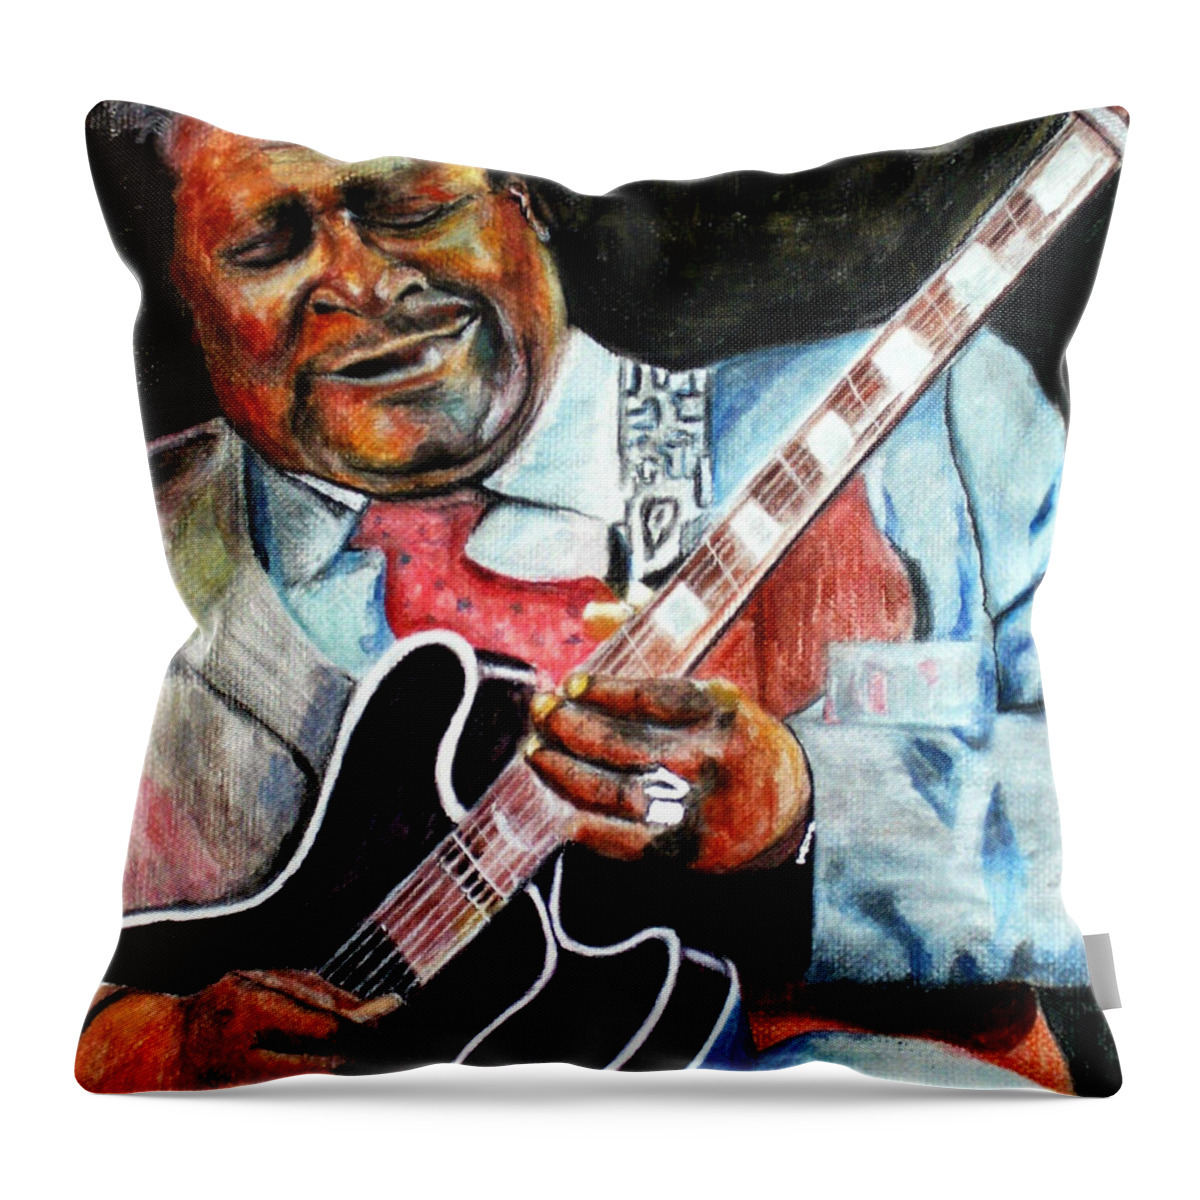 Bbking Throw Pillow featuring the painting BBKing by Frances Marino